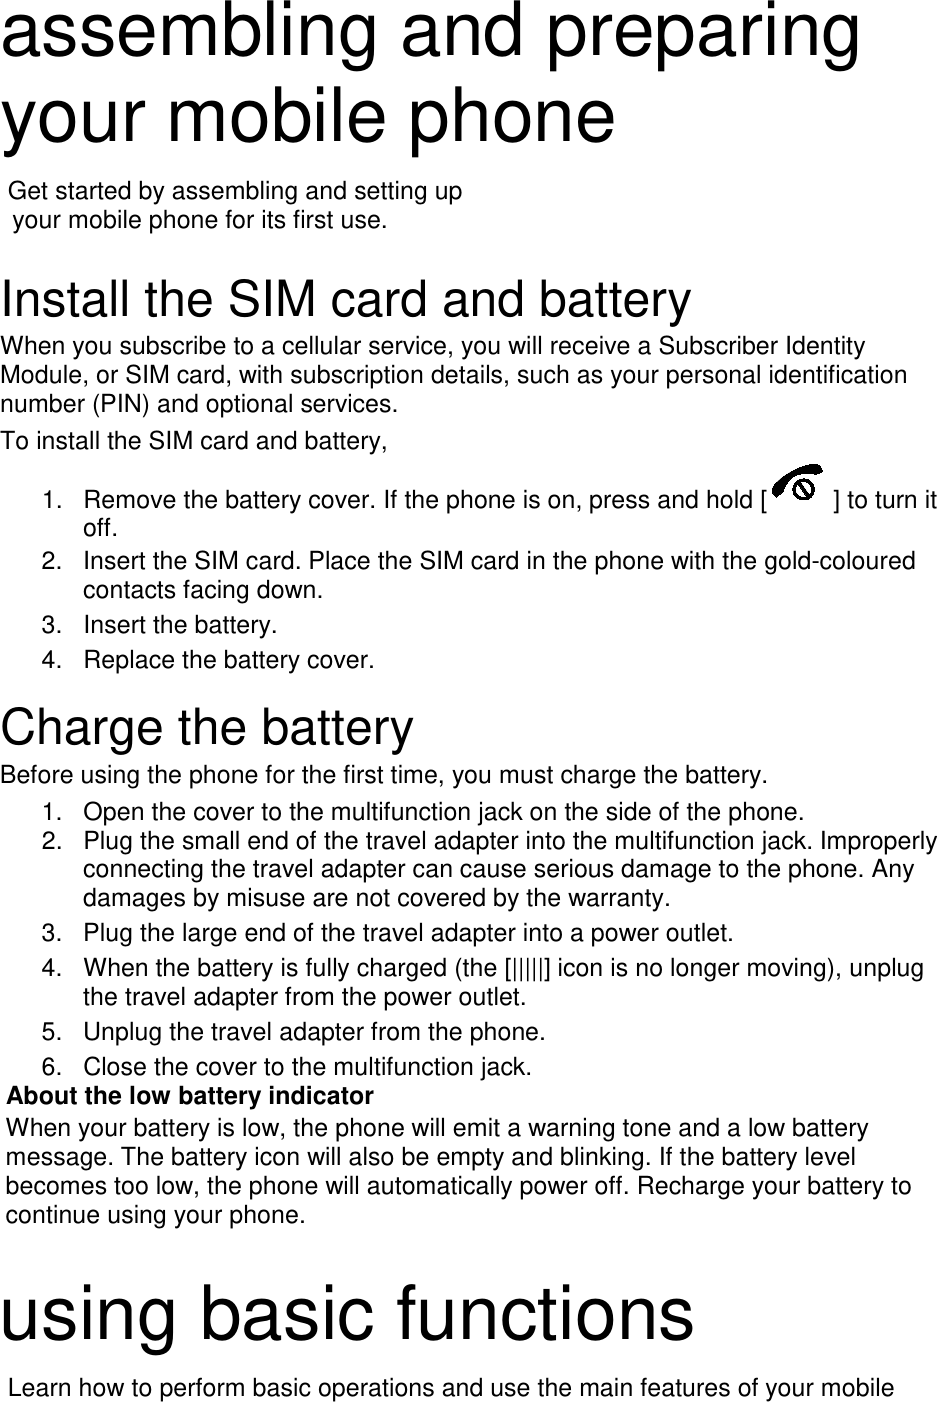 assembling and preparing your mobile phone    Get started by assembling and setting up    your mobile phone for its first use.  Install the SIM card and battery When you subscribe to a cellular service, you will receive a Subscriber Identity Module, or SIM card, with subscription details, such as your personal identification number (PIN) and optional services. To install the SIM card and battery, 1. Remove the battery cover. If the phone is on, press and hold [ ] to turn it off. 2. Insert the SIM card. Place the SIM card in the phone with the gold-coloured contacts facing down. 3. Insert the battery. 4. Replace the battery cover.  Charge the battery Before using the phone for the first time, you must charge the battery. 1. Open the cover to the multifunction jack on the side of the phone. 2. Plug the small end of the travel adapter into the multifunction jack. Improperly connecting the travel adapter can cause serious damage to the phone. Any damages by misuse are not covered by the warranty. 3. Plug the large end of the travel adapter into a power outlet. 4. When the battery is fully charged (the [|||||] icon is no longer moving), unplug the travel adapter from the power outlet. 5. Unplug the travel adapter from the phone. 6. Close the cover to the multifunction jack. About the low battery indicator When your battery is low, the phone will emit a warning tone and a low battery message. The battery icon will also be empty and blinking. If the battery level becomes too low, the phone will automatically power off. Recharge your battery to continue using your phone.  using basic functions  Learn how to perform basic operations and use the main features of your mobile 